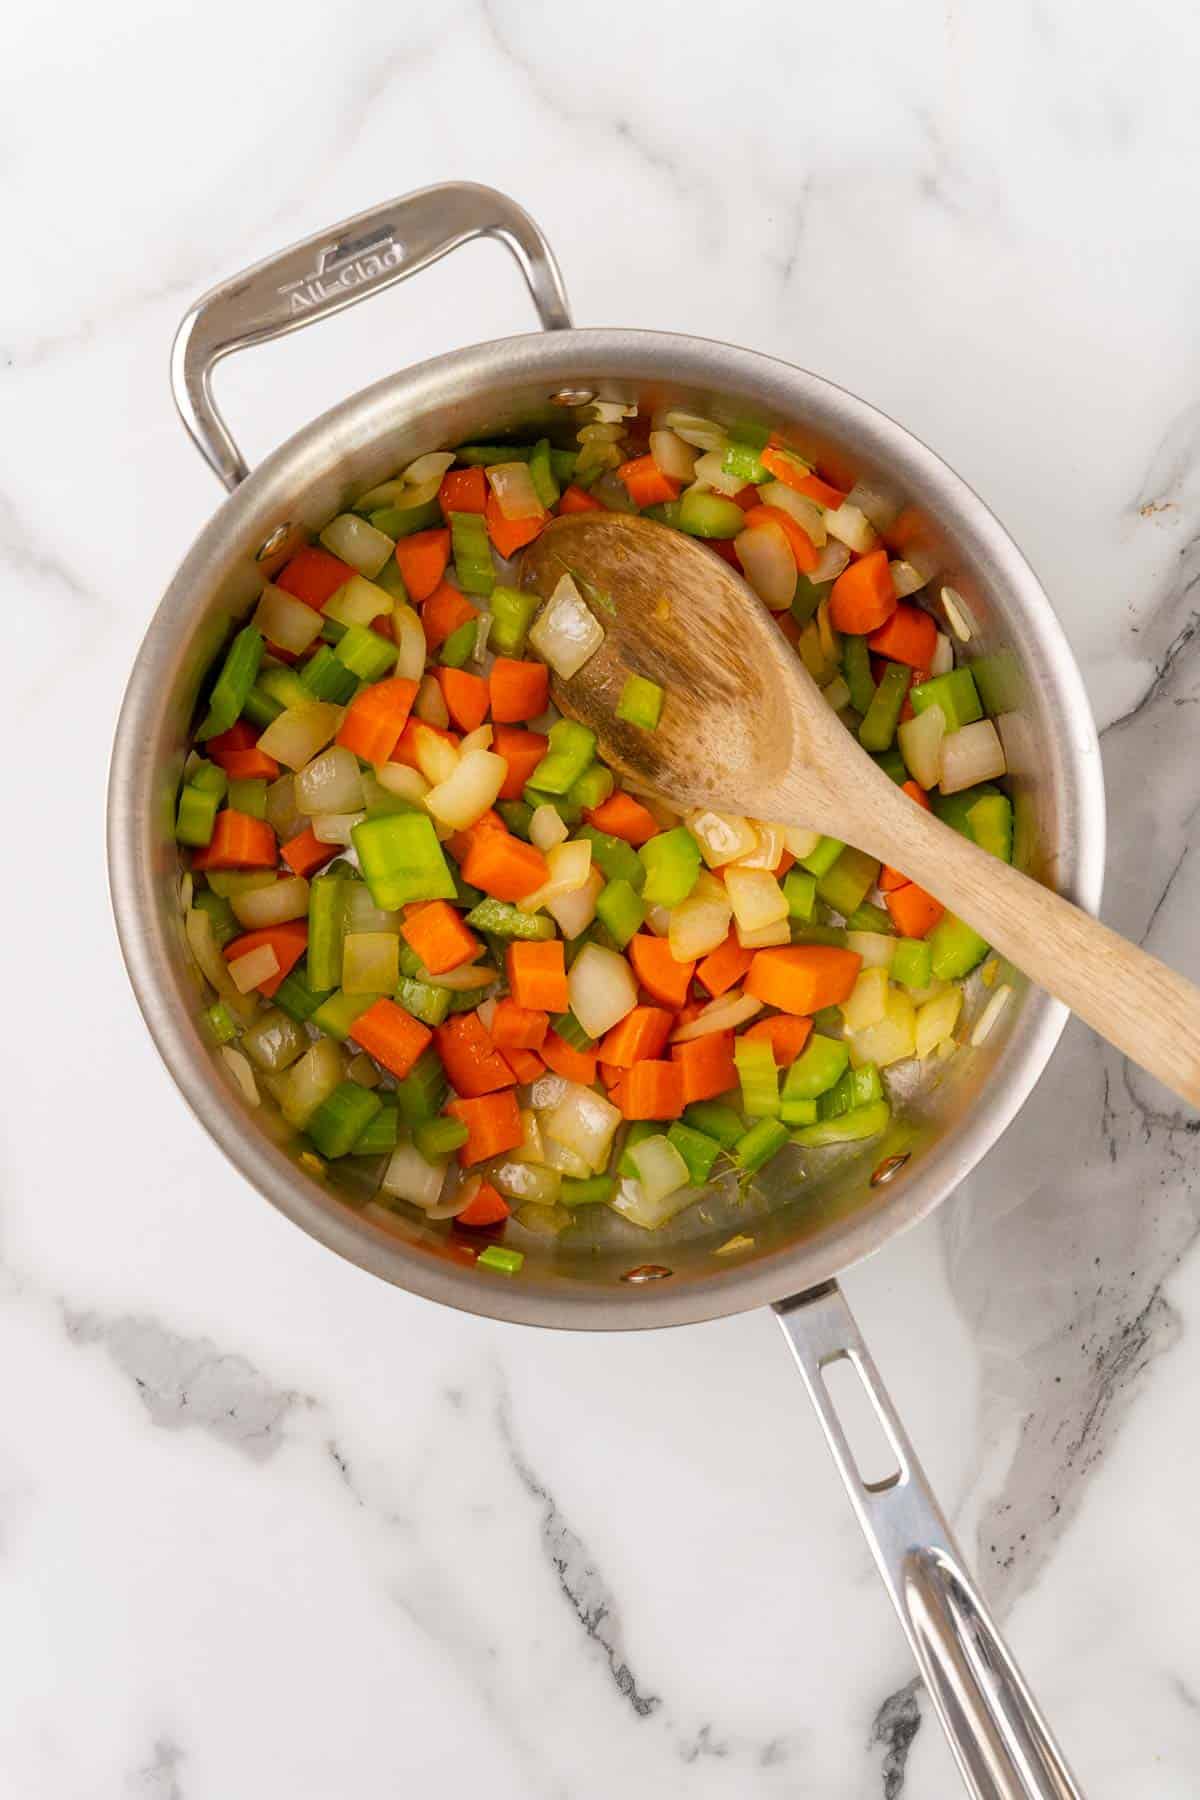 Chopped vegetables added to a silver saucepan with a wooden spoon for stirring, as seen from above on a white marble countertop